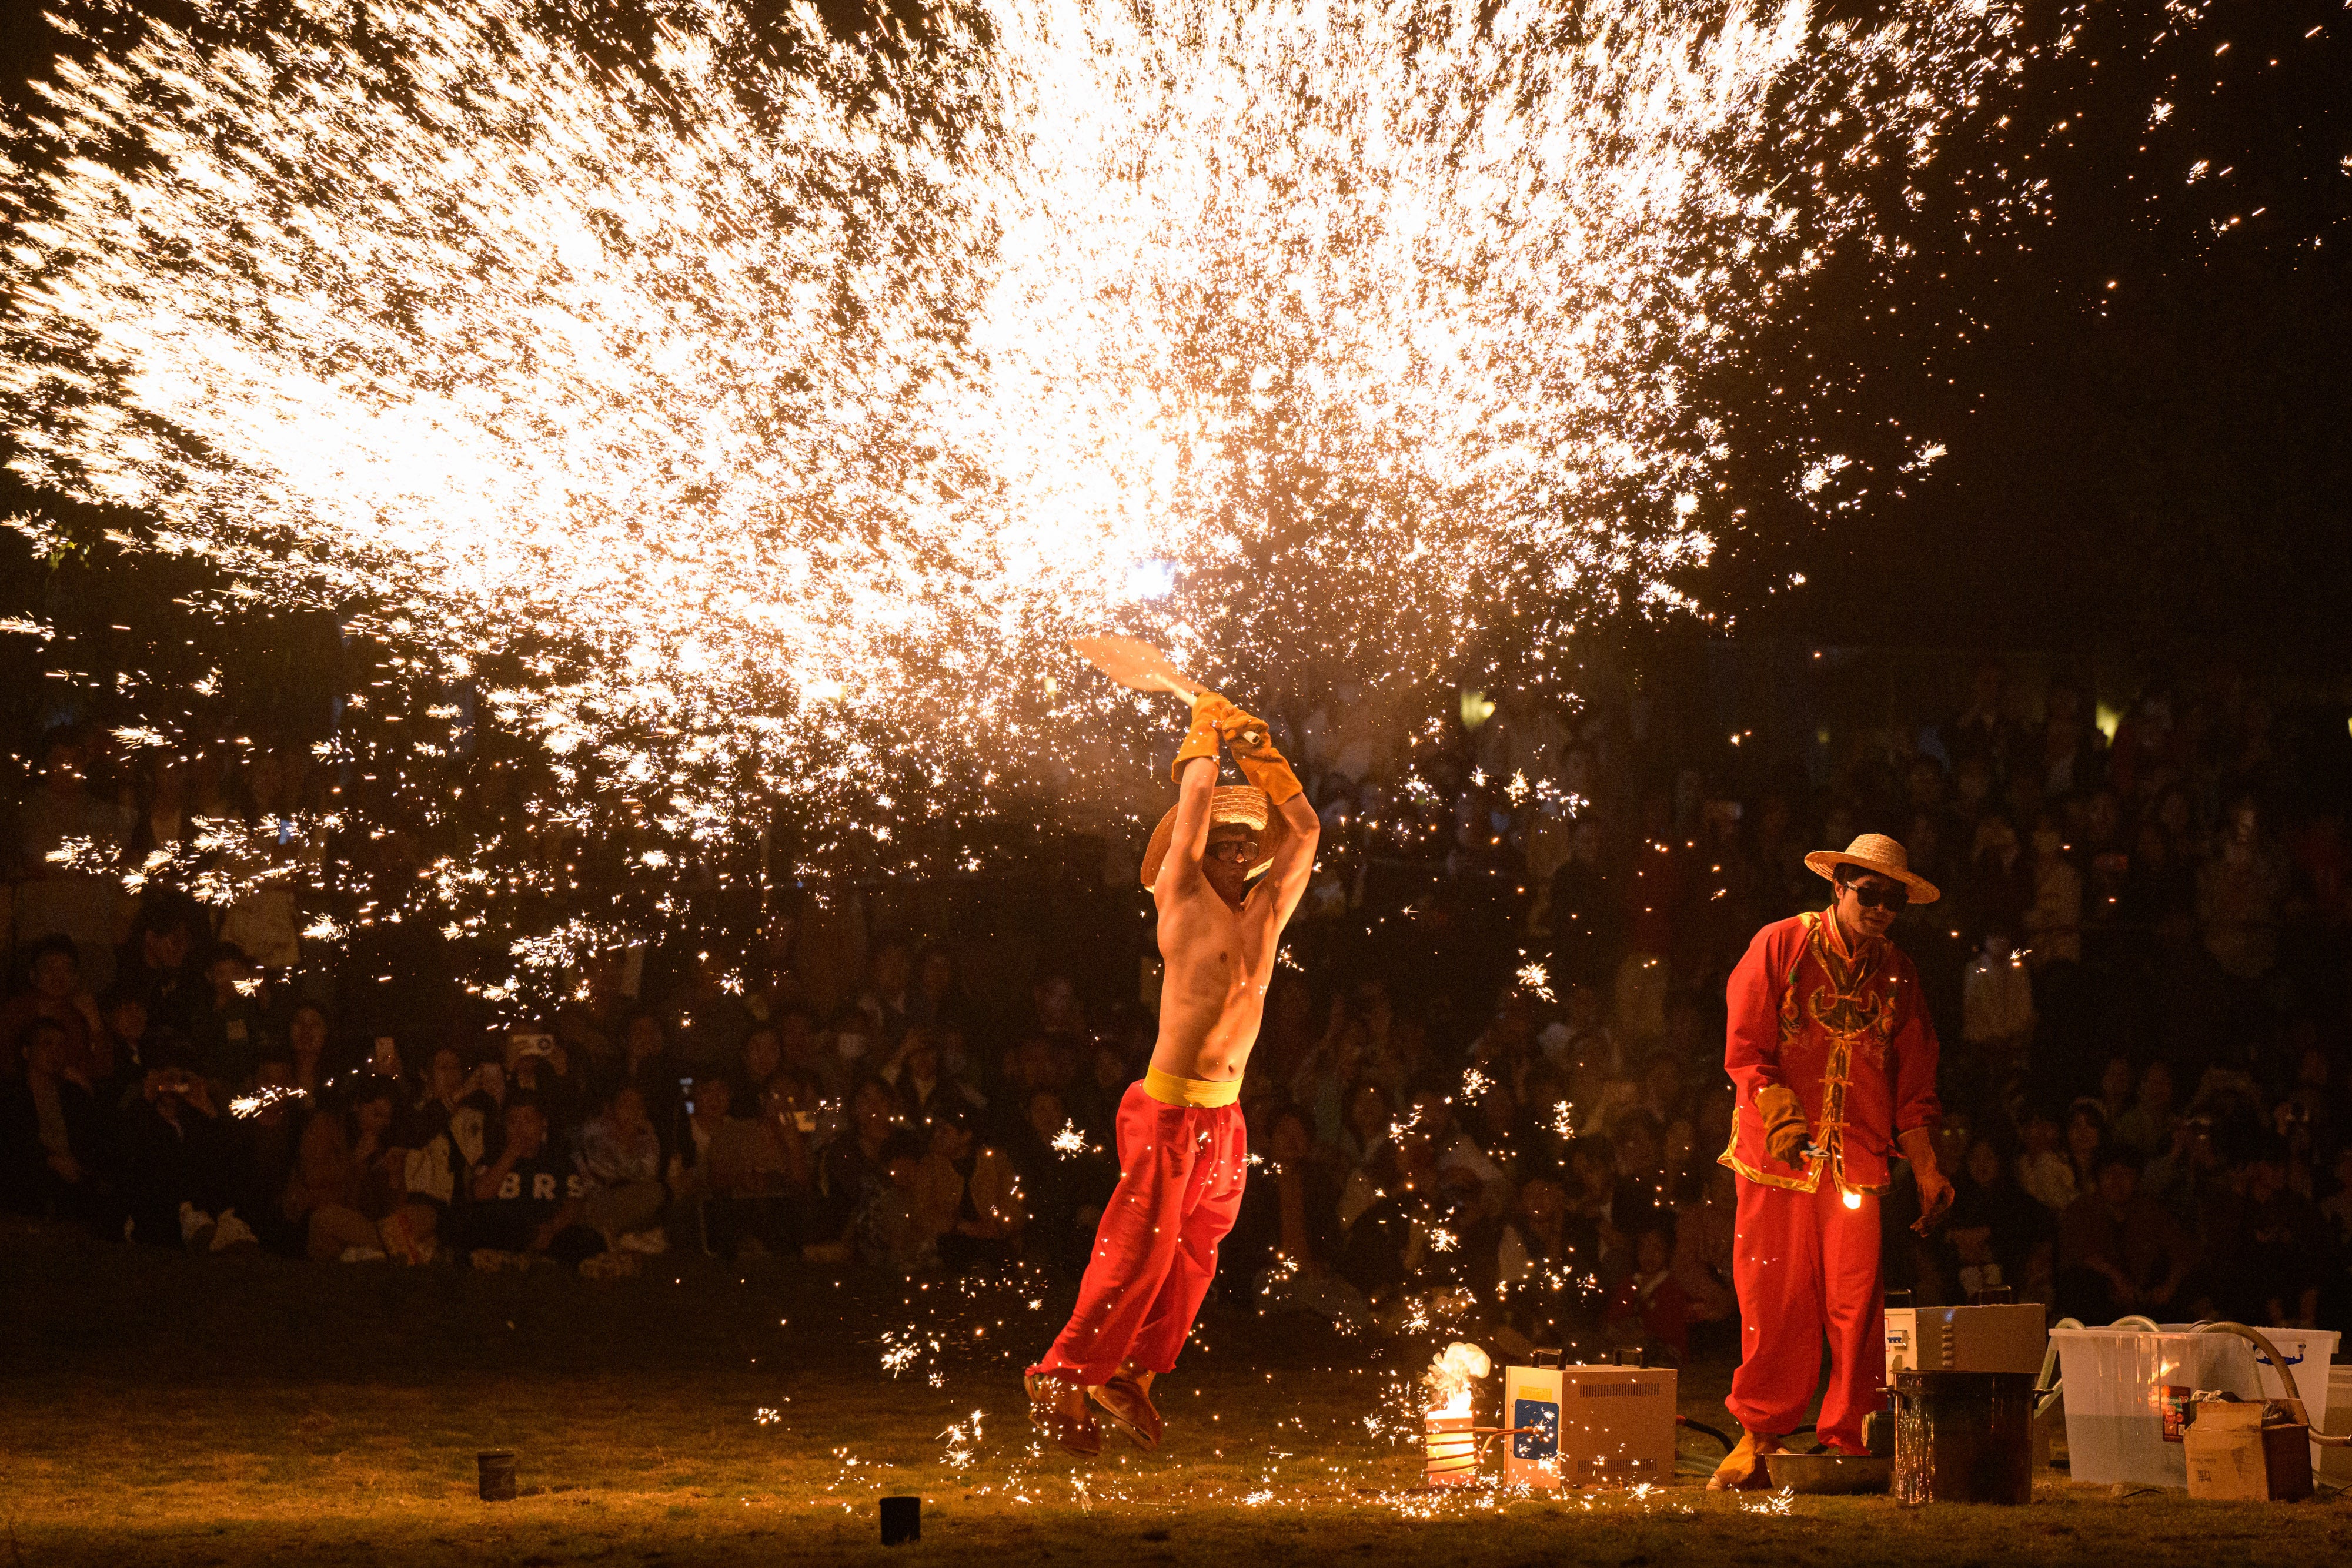 An event marking the new year in Foshan, Guangdong in China